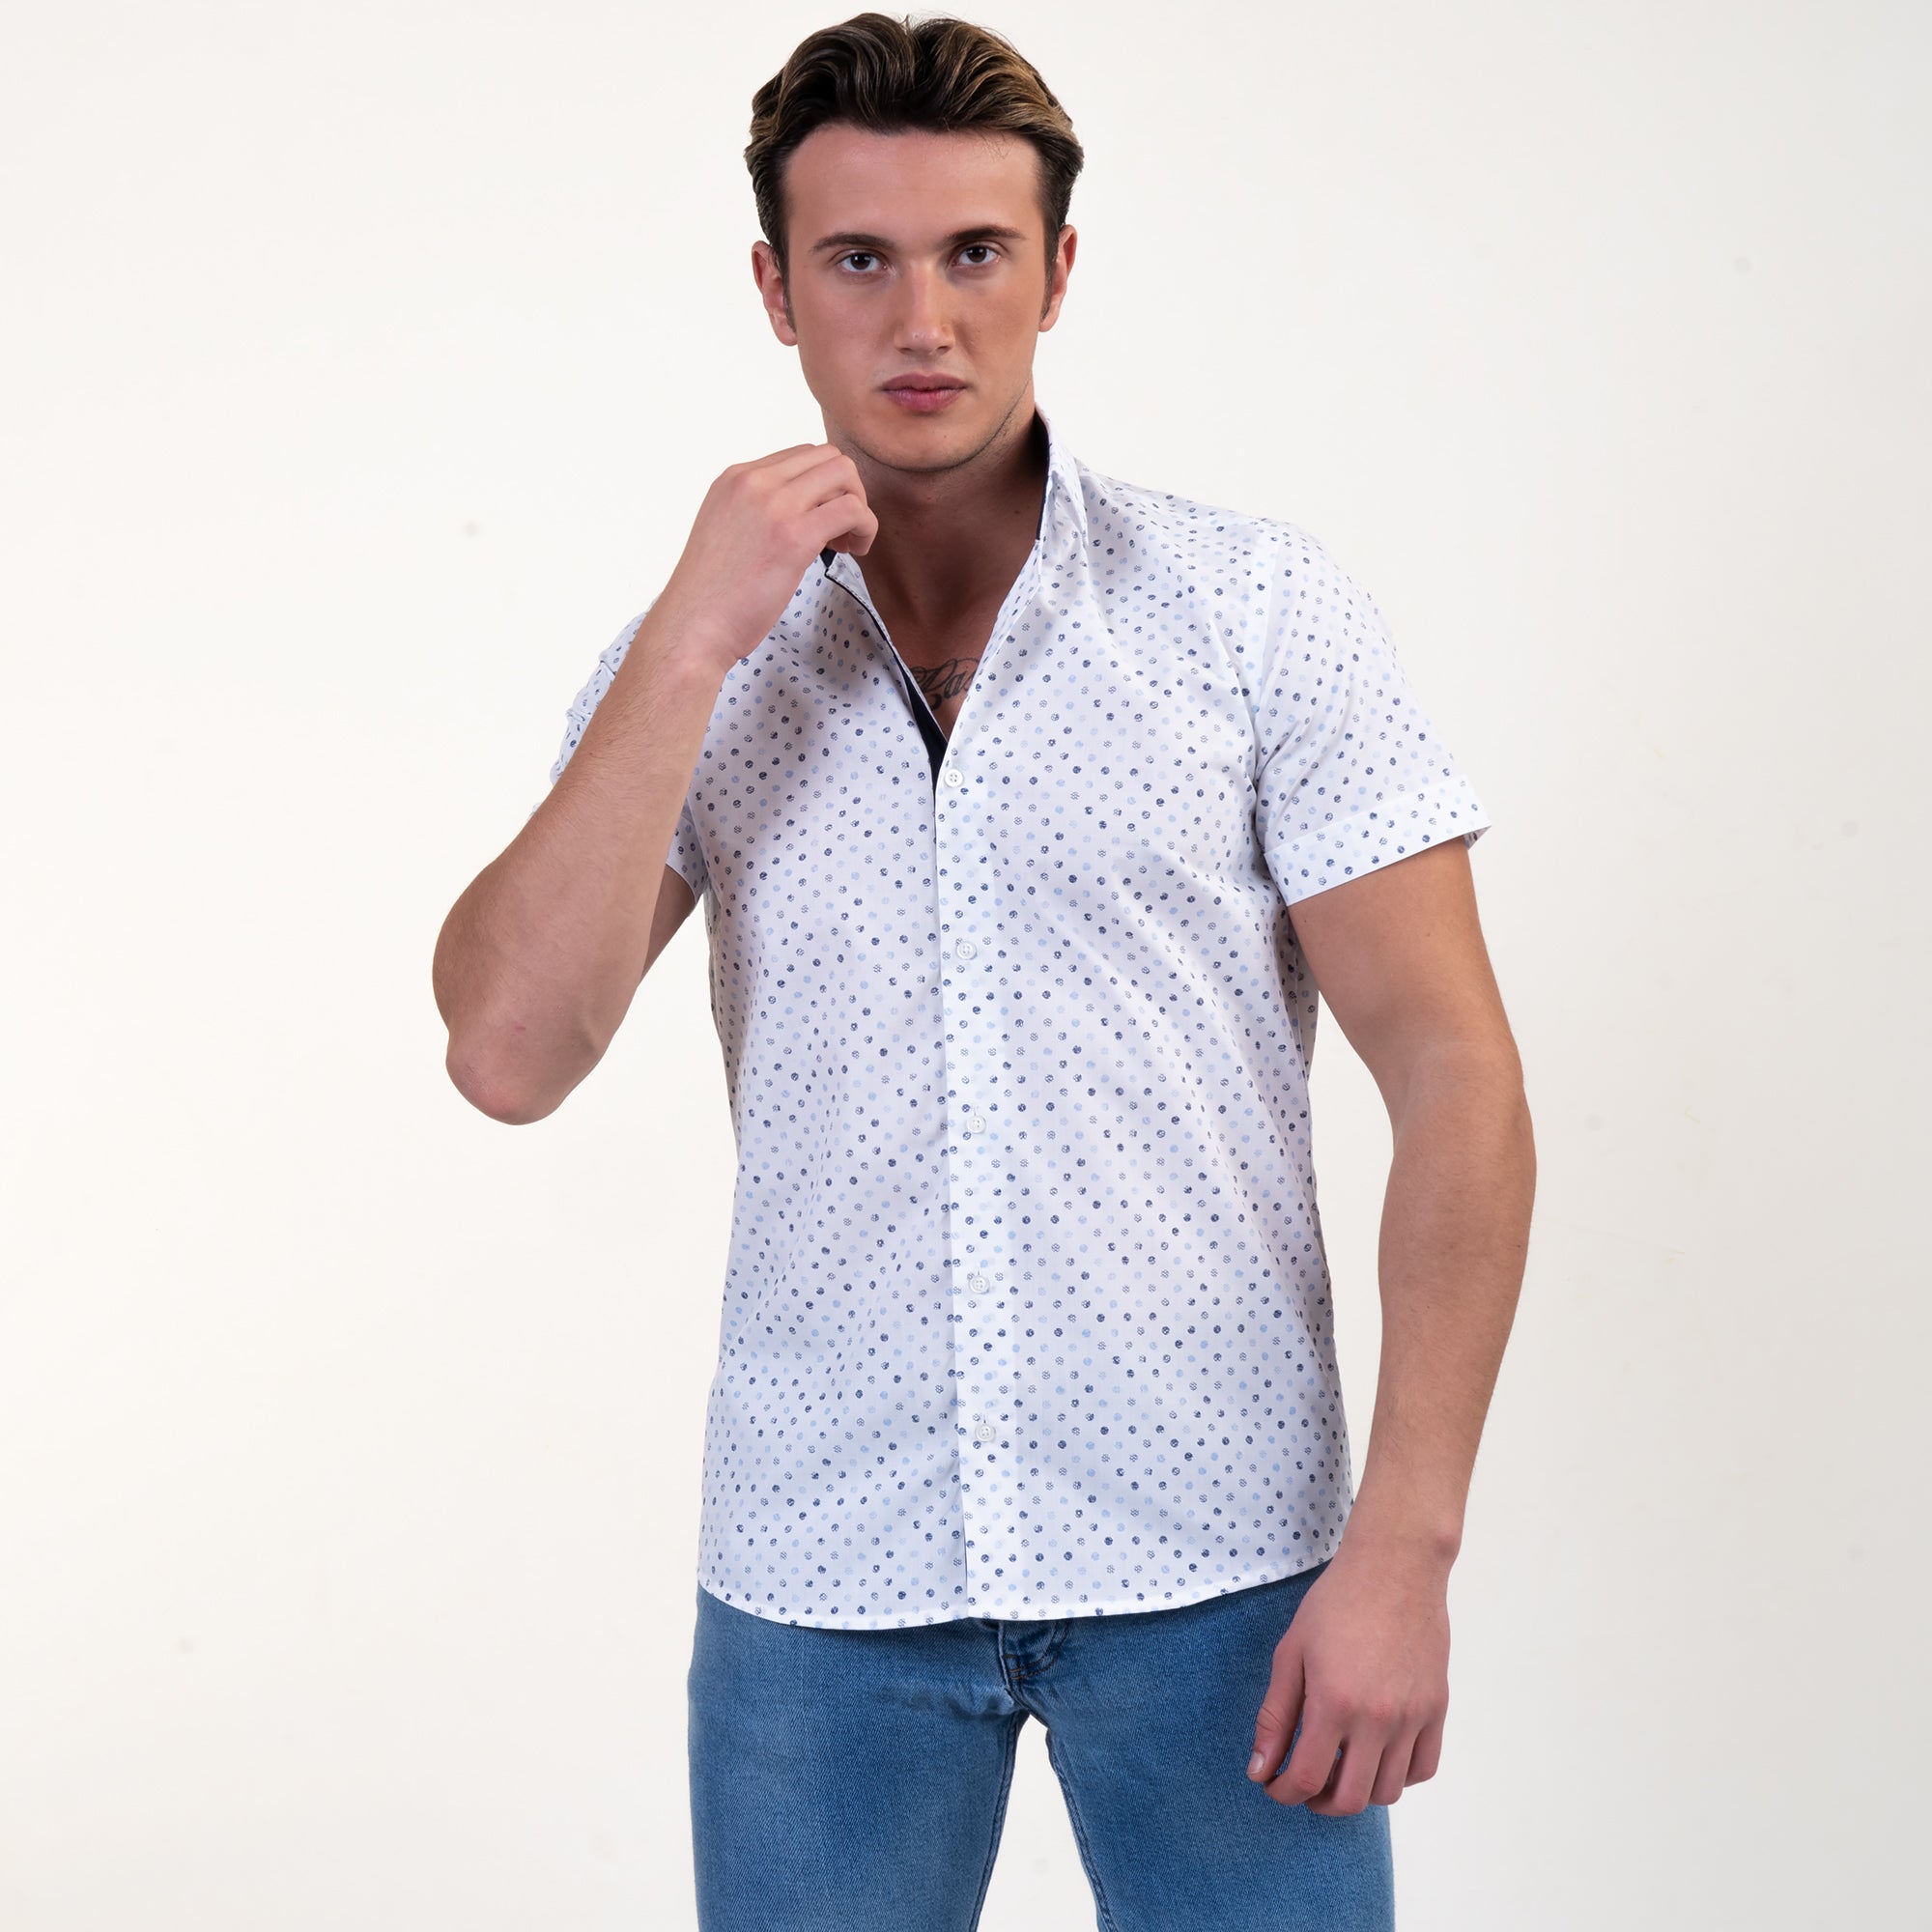 White Blue Dots Mens Short Sleeve Button up Shirts - Tailored Slim Fit Cotton Dress Shirts